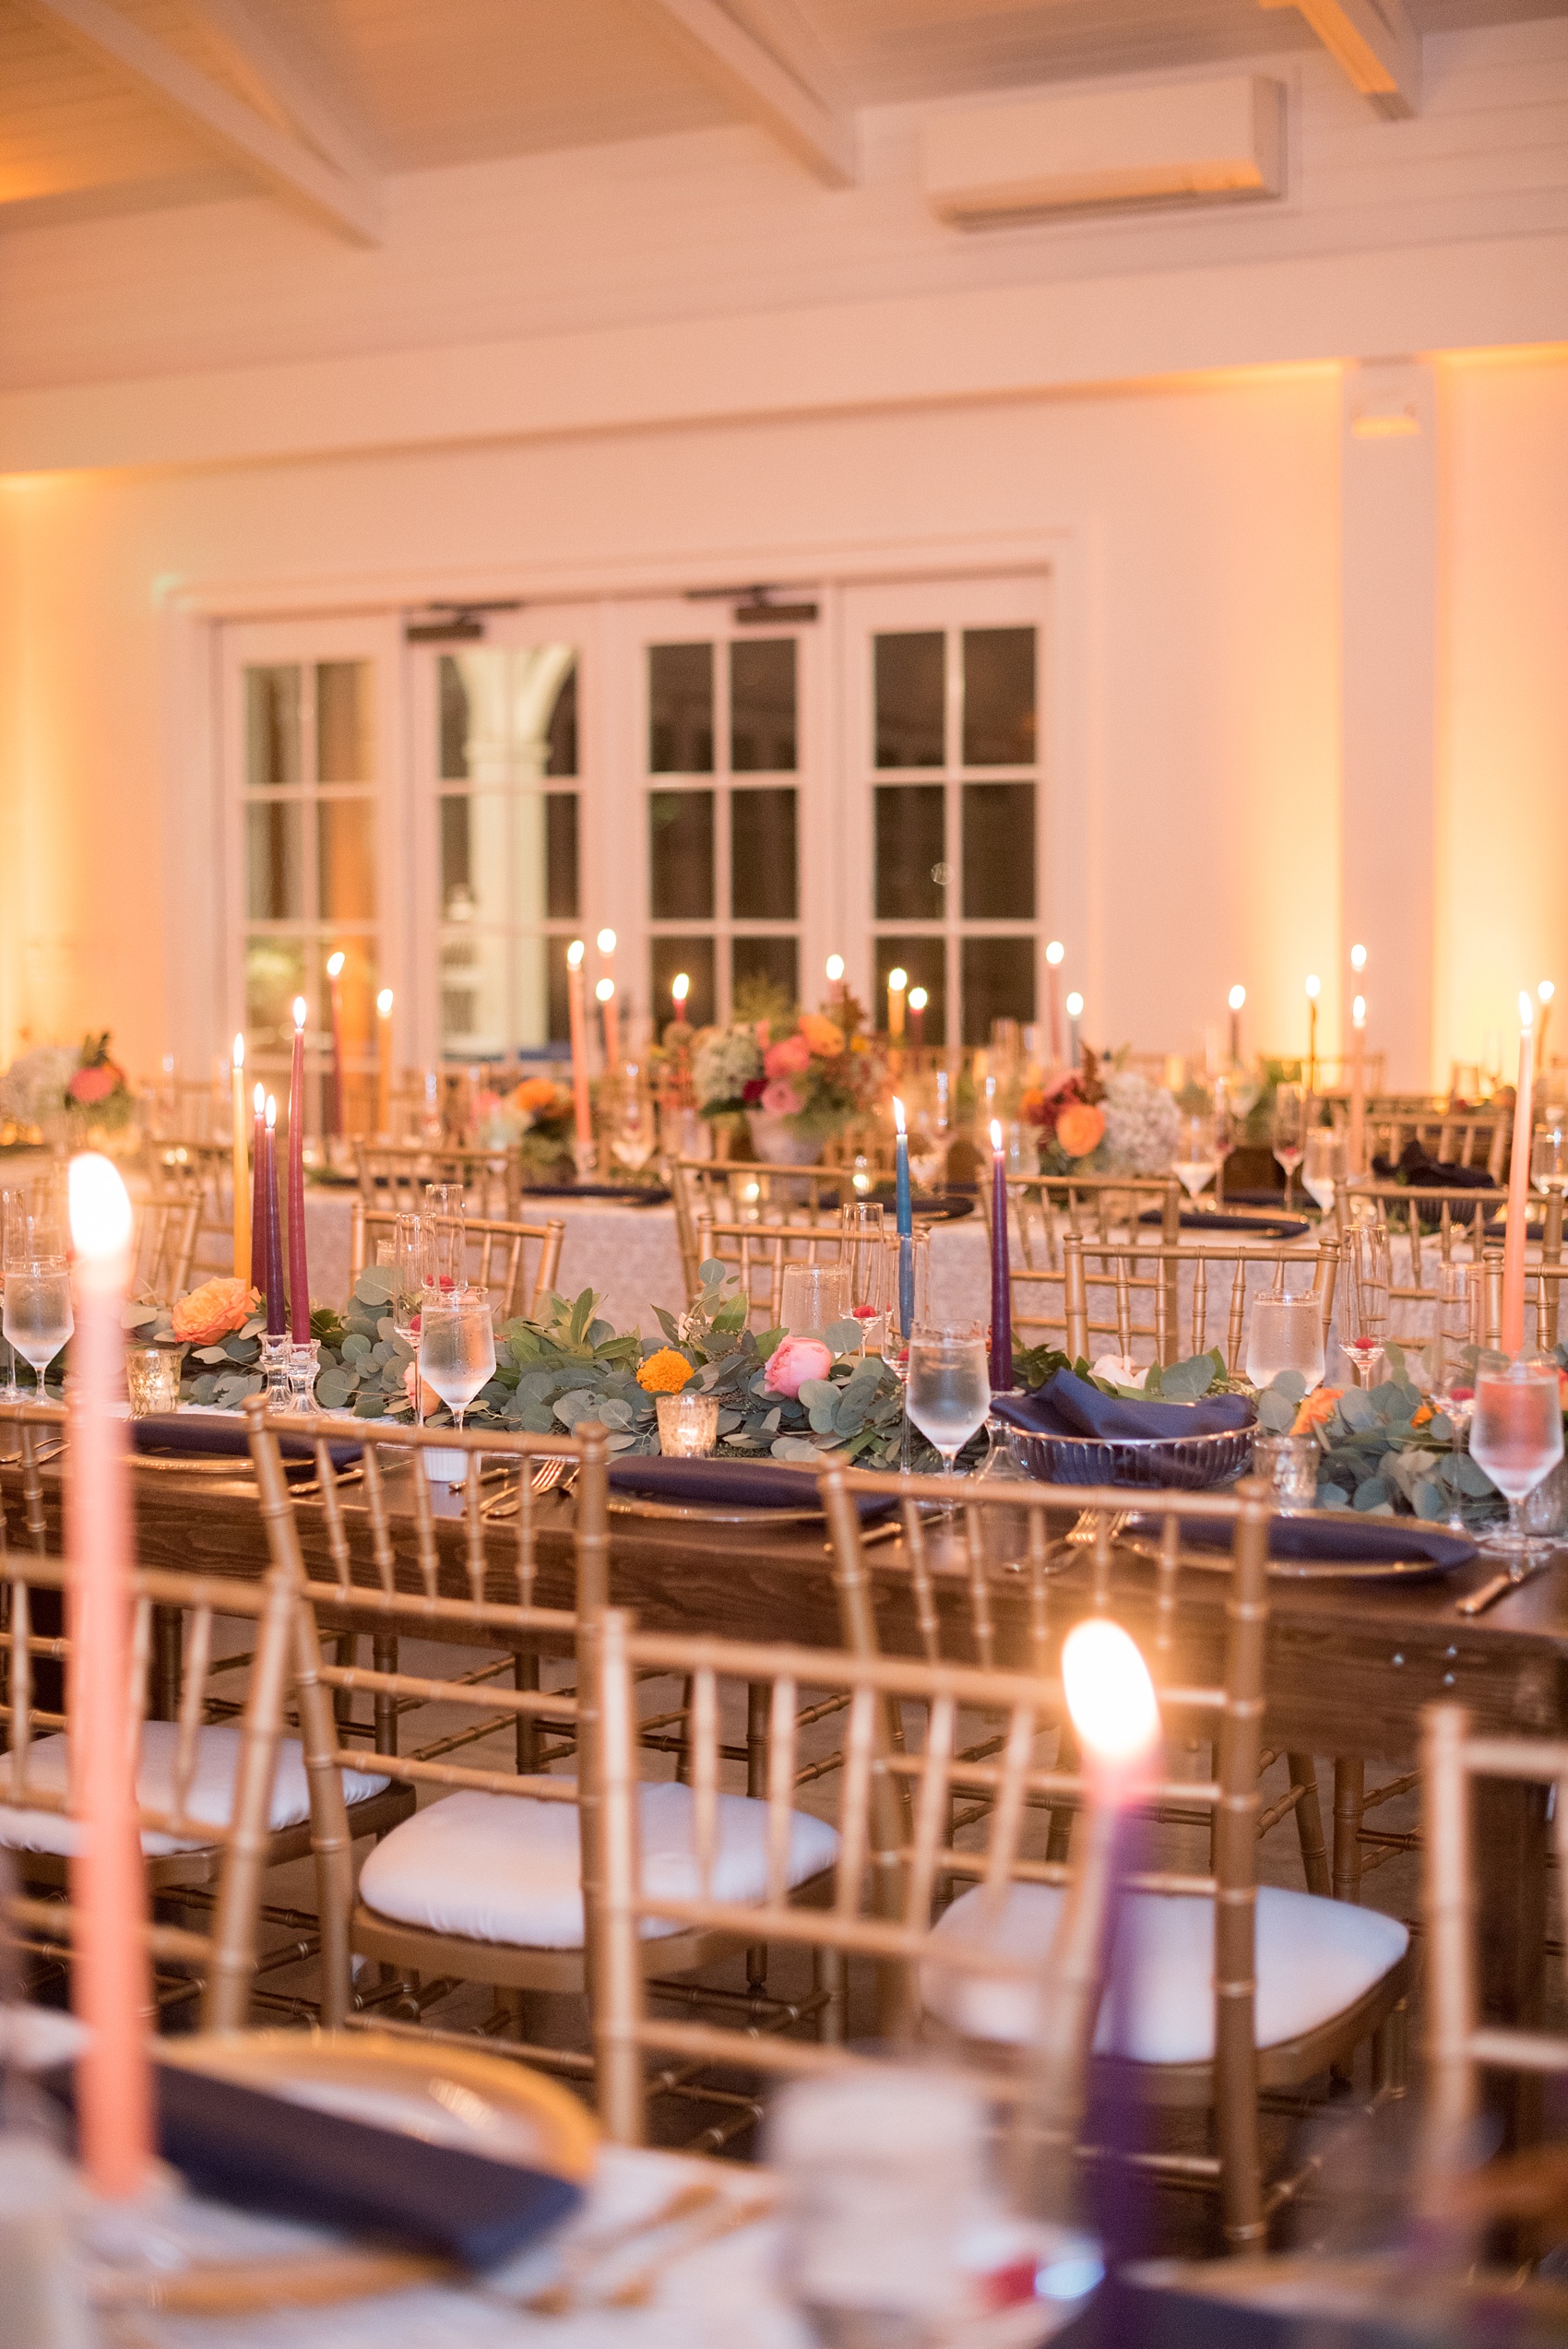 Mikkel Paige Photography photos from a Merrimon-Wynne House wedding in Raleigh. The reception was drenched in romantic candlelight and eucalyptus garland held inside the Carriage House. Glass chargers were in between gold flatware and mercury glass votive holders.